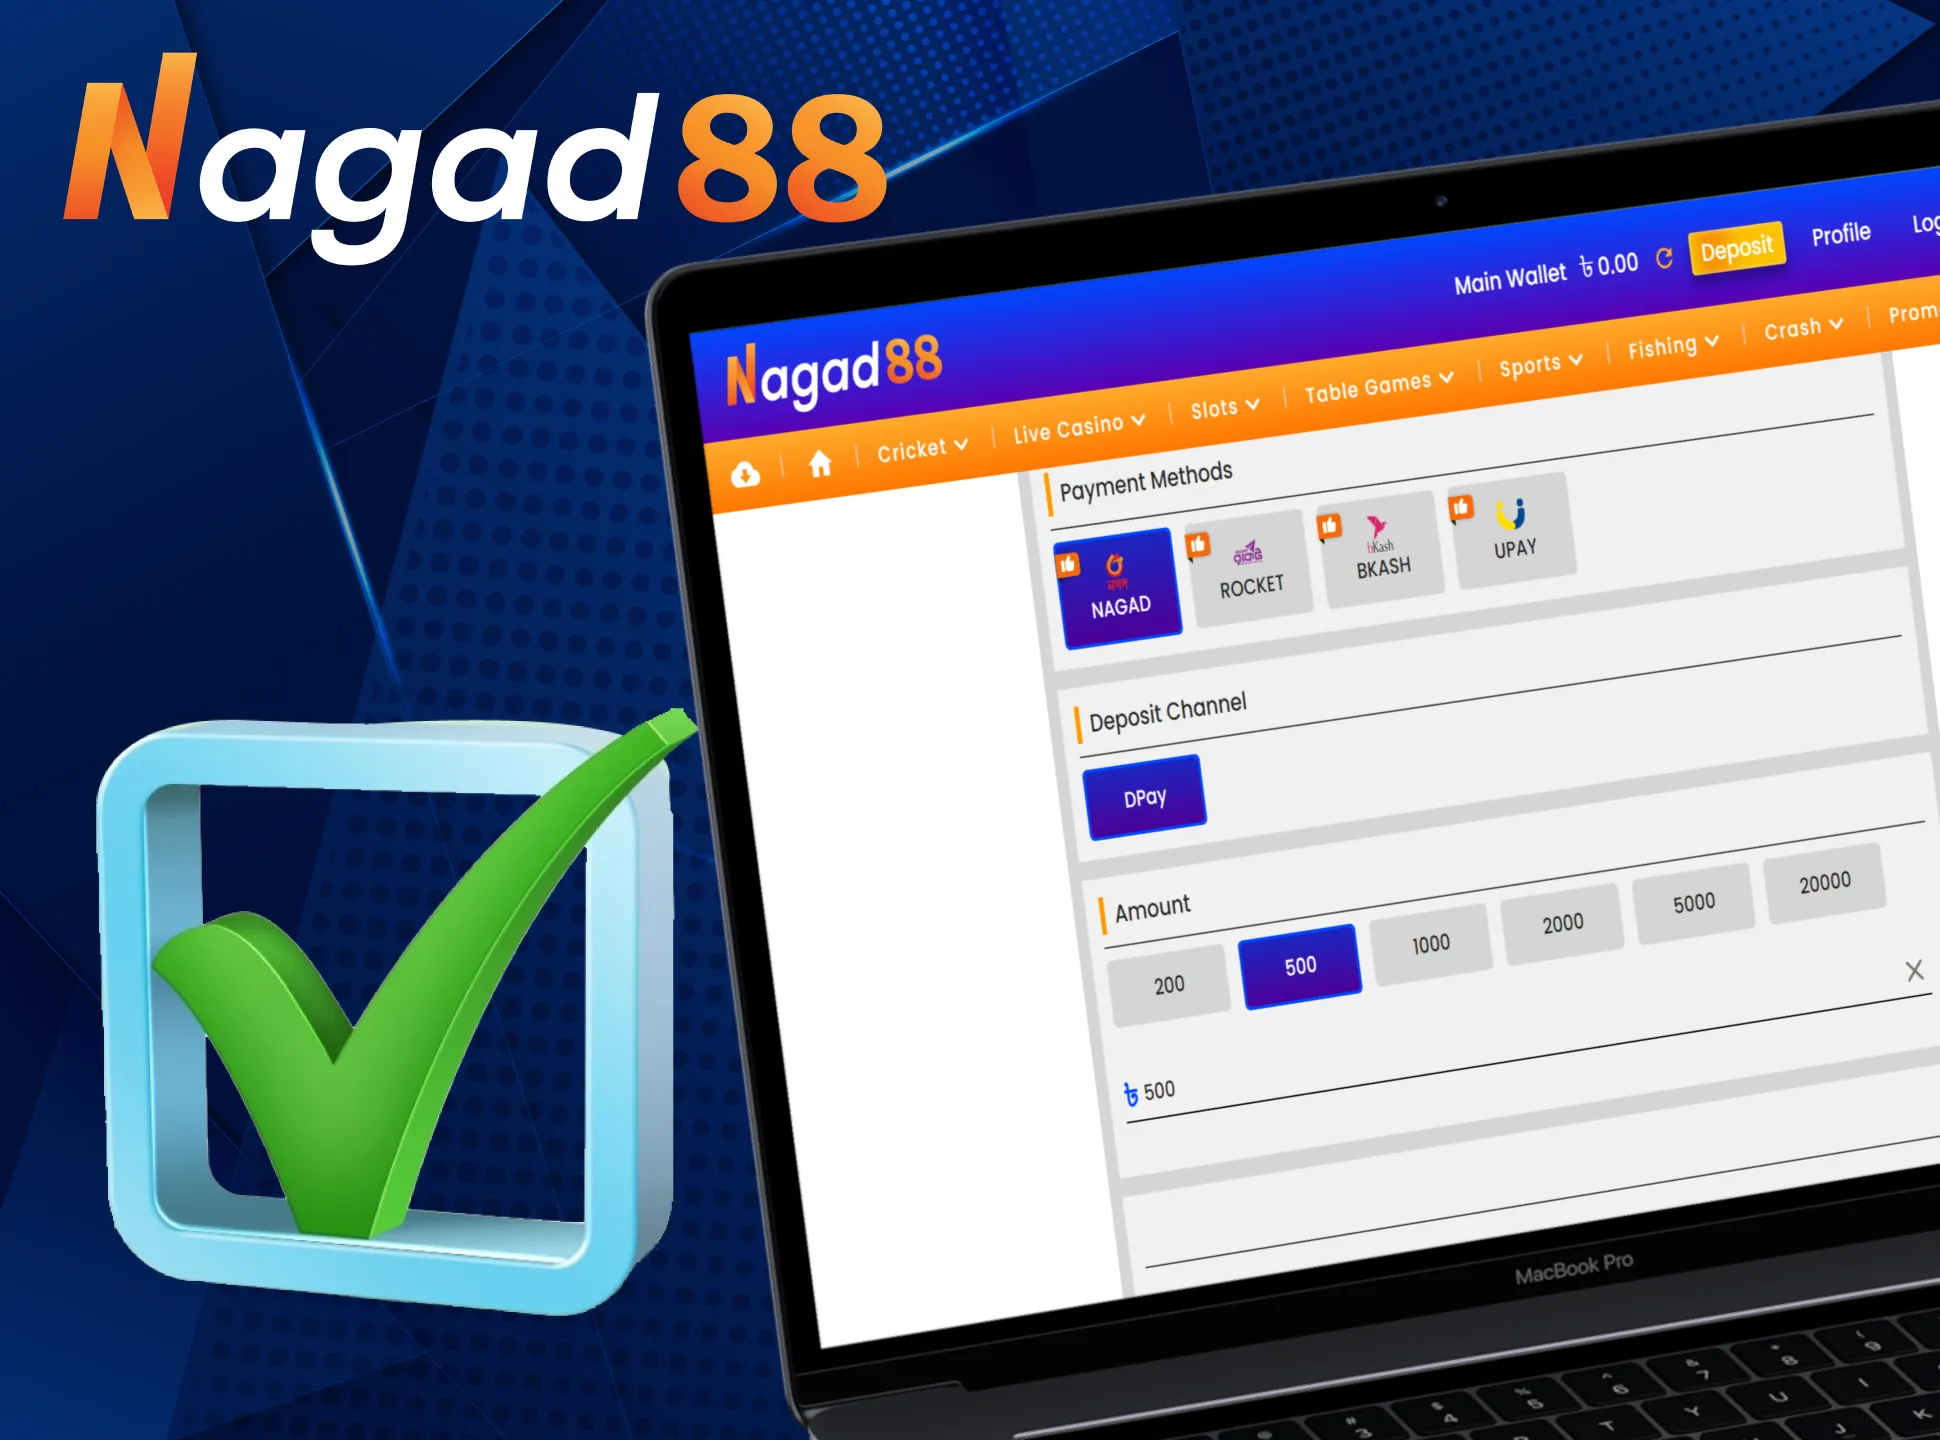 Fill out the data and confirm the withdrawal of funds from Nagad88.